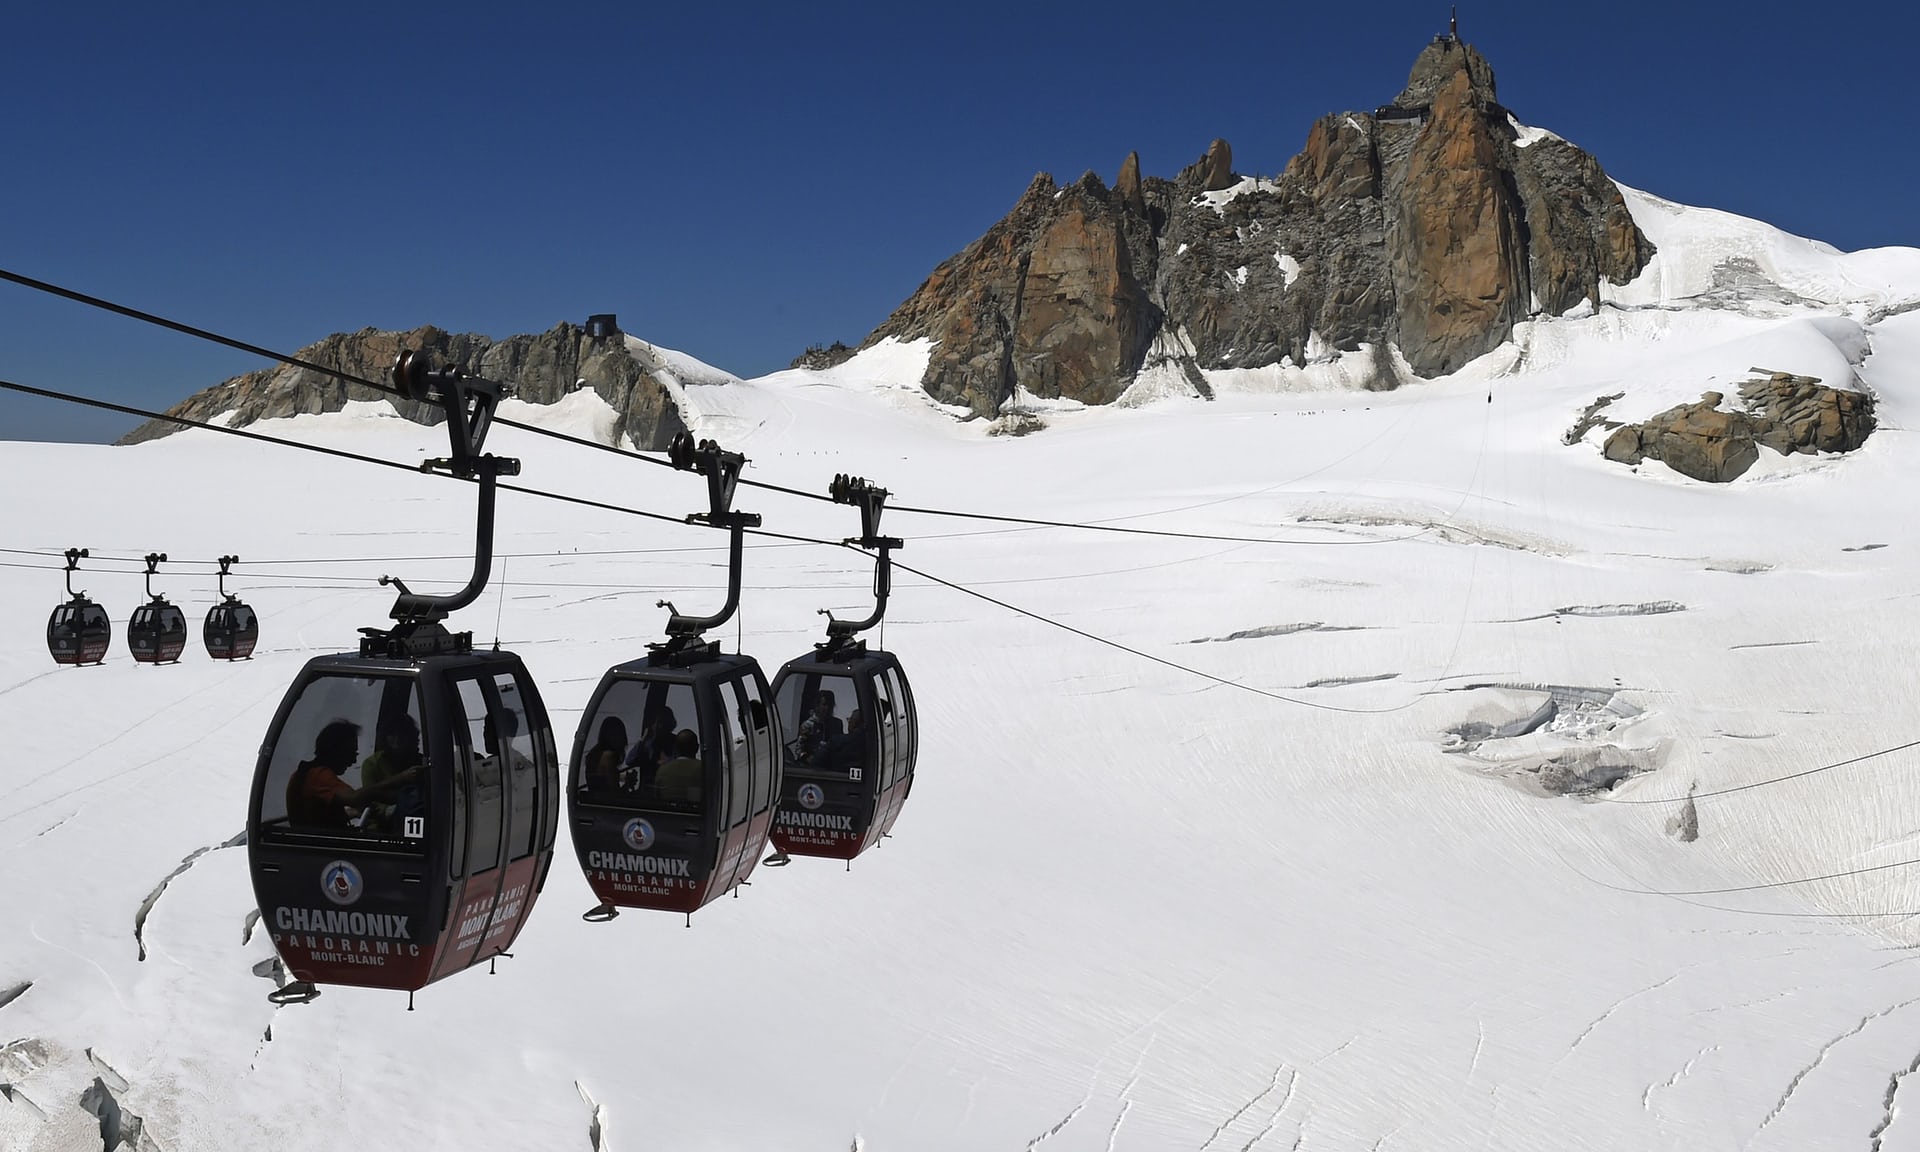 The gondolas that go on top of the Mar de Glace, from Aiguille du Midi in France (Chamonix) to Punta Helbronner in Italy (Courmayeur)